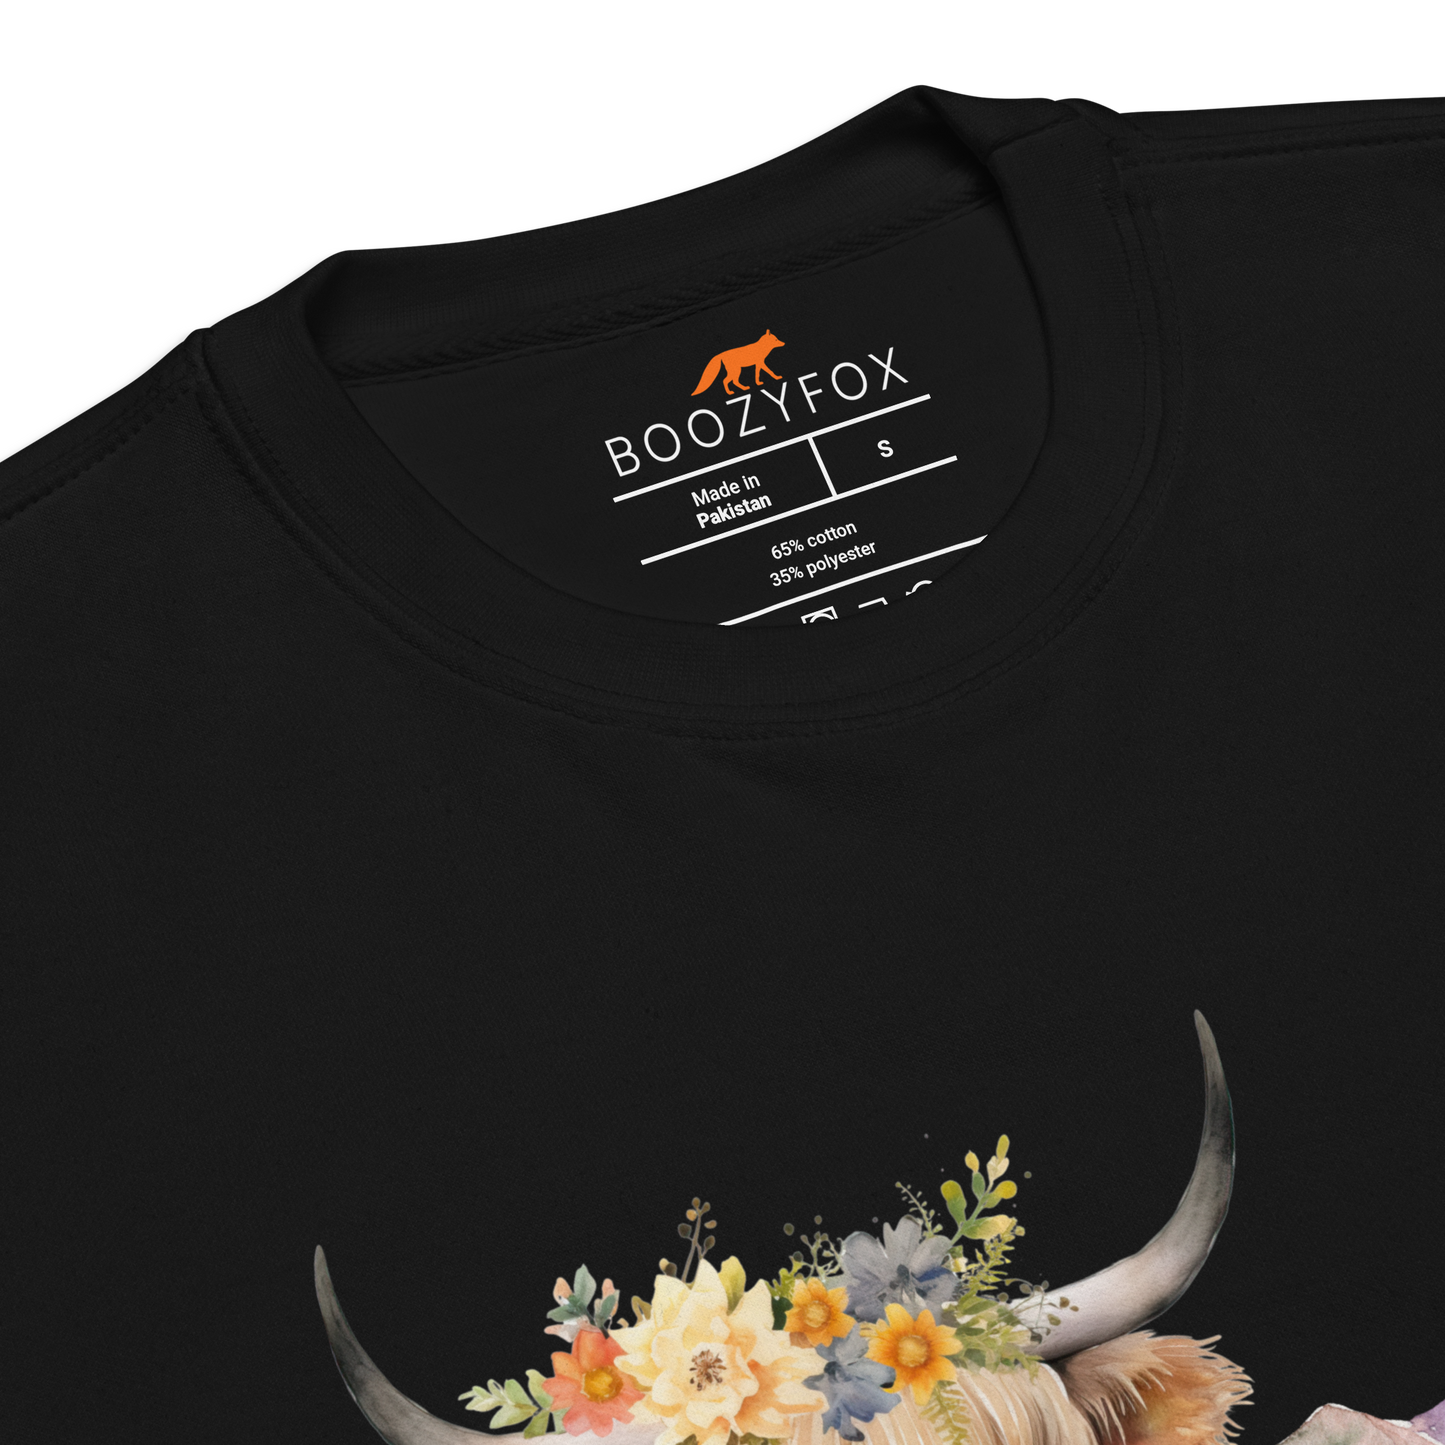 Product details of a Black Premium Highland Cow Sweatshirt featuring an adorable Highland Girl graphic on the chest - Cute Graphic Highland Cow Sweatshirts - Boozy Fox